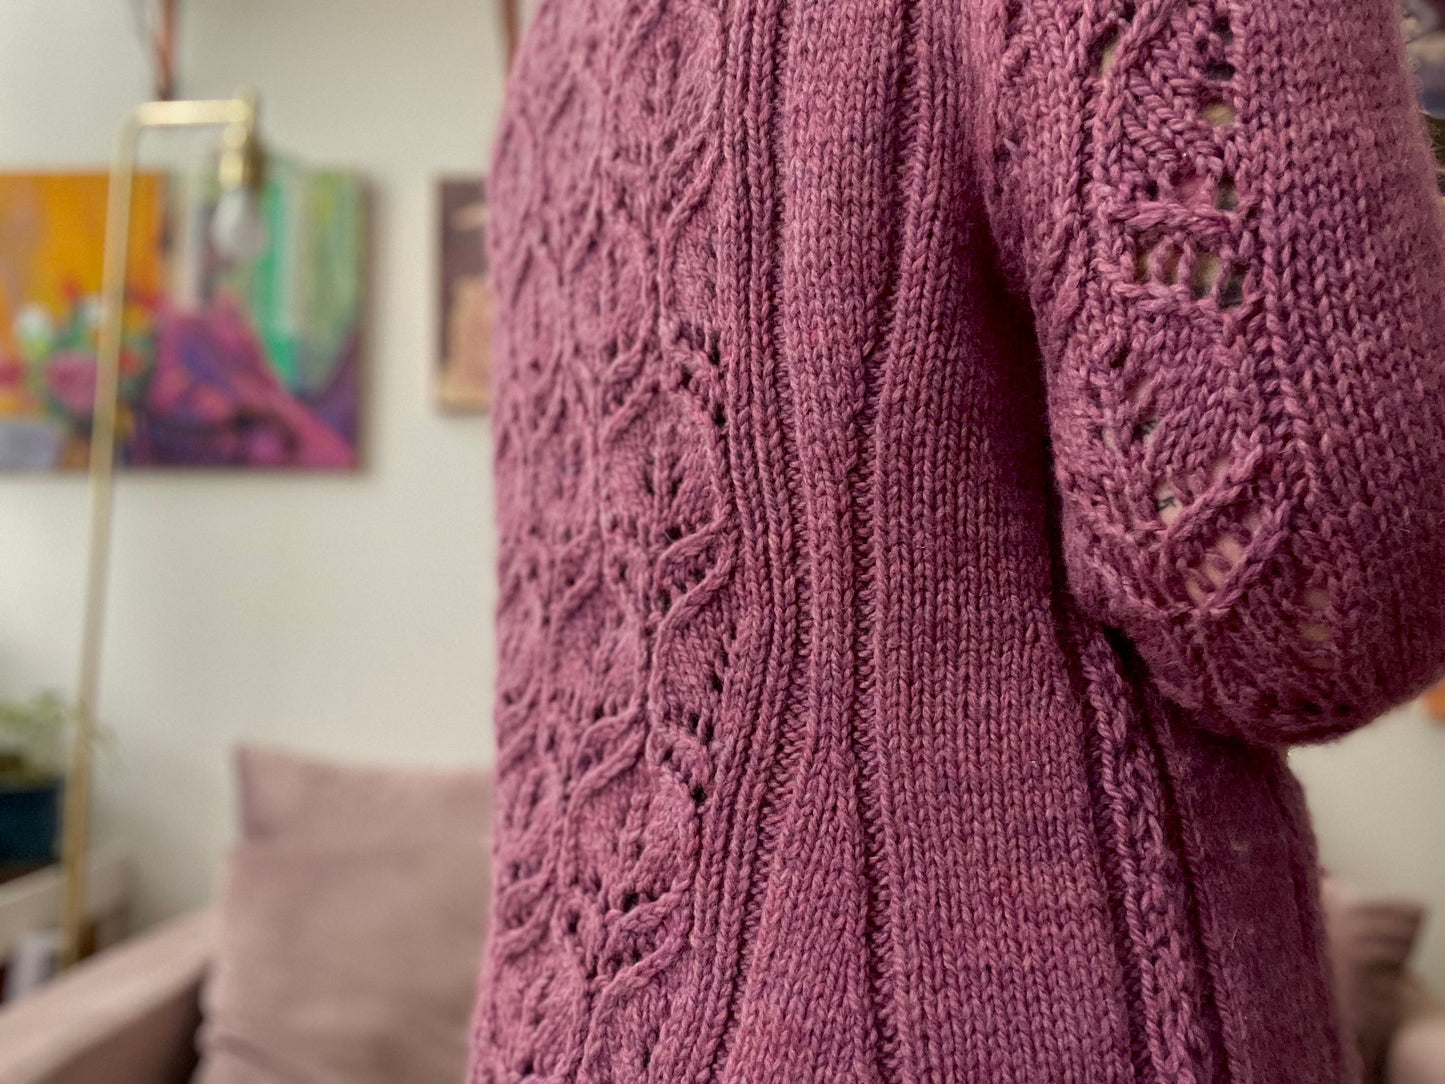 Seen close up, Bess wears a light pink cardigan. It's knit in bulky yarn with large lace panels down the arms and back.